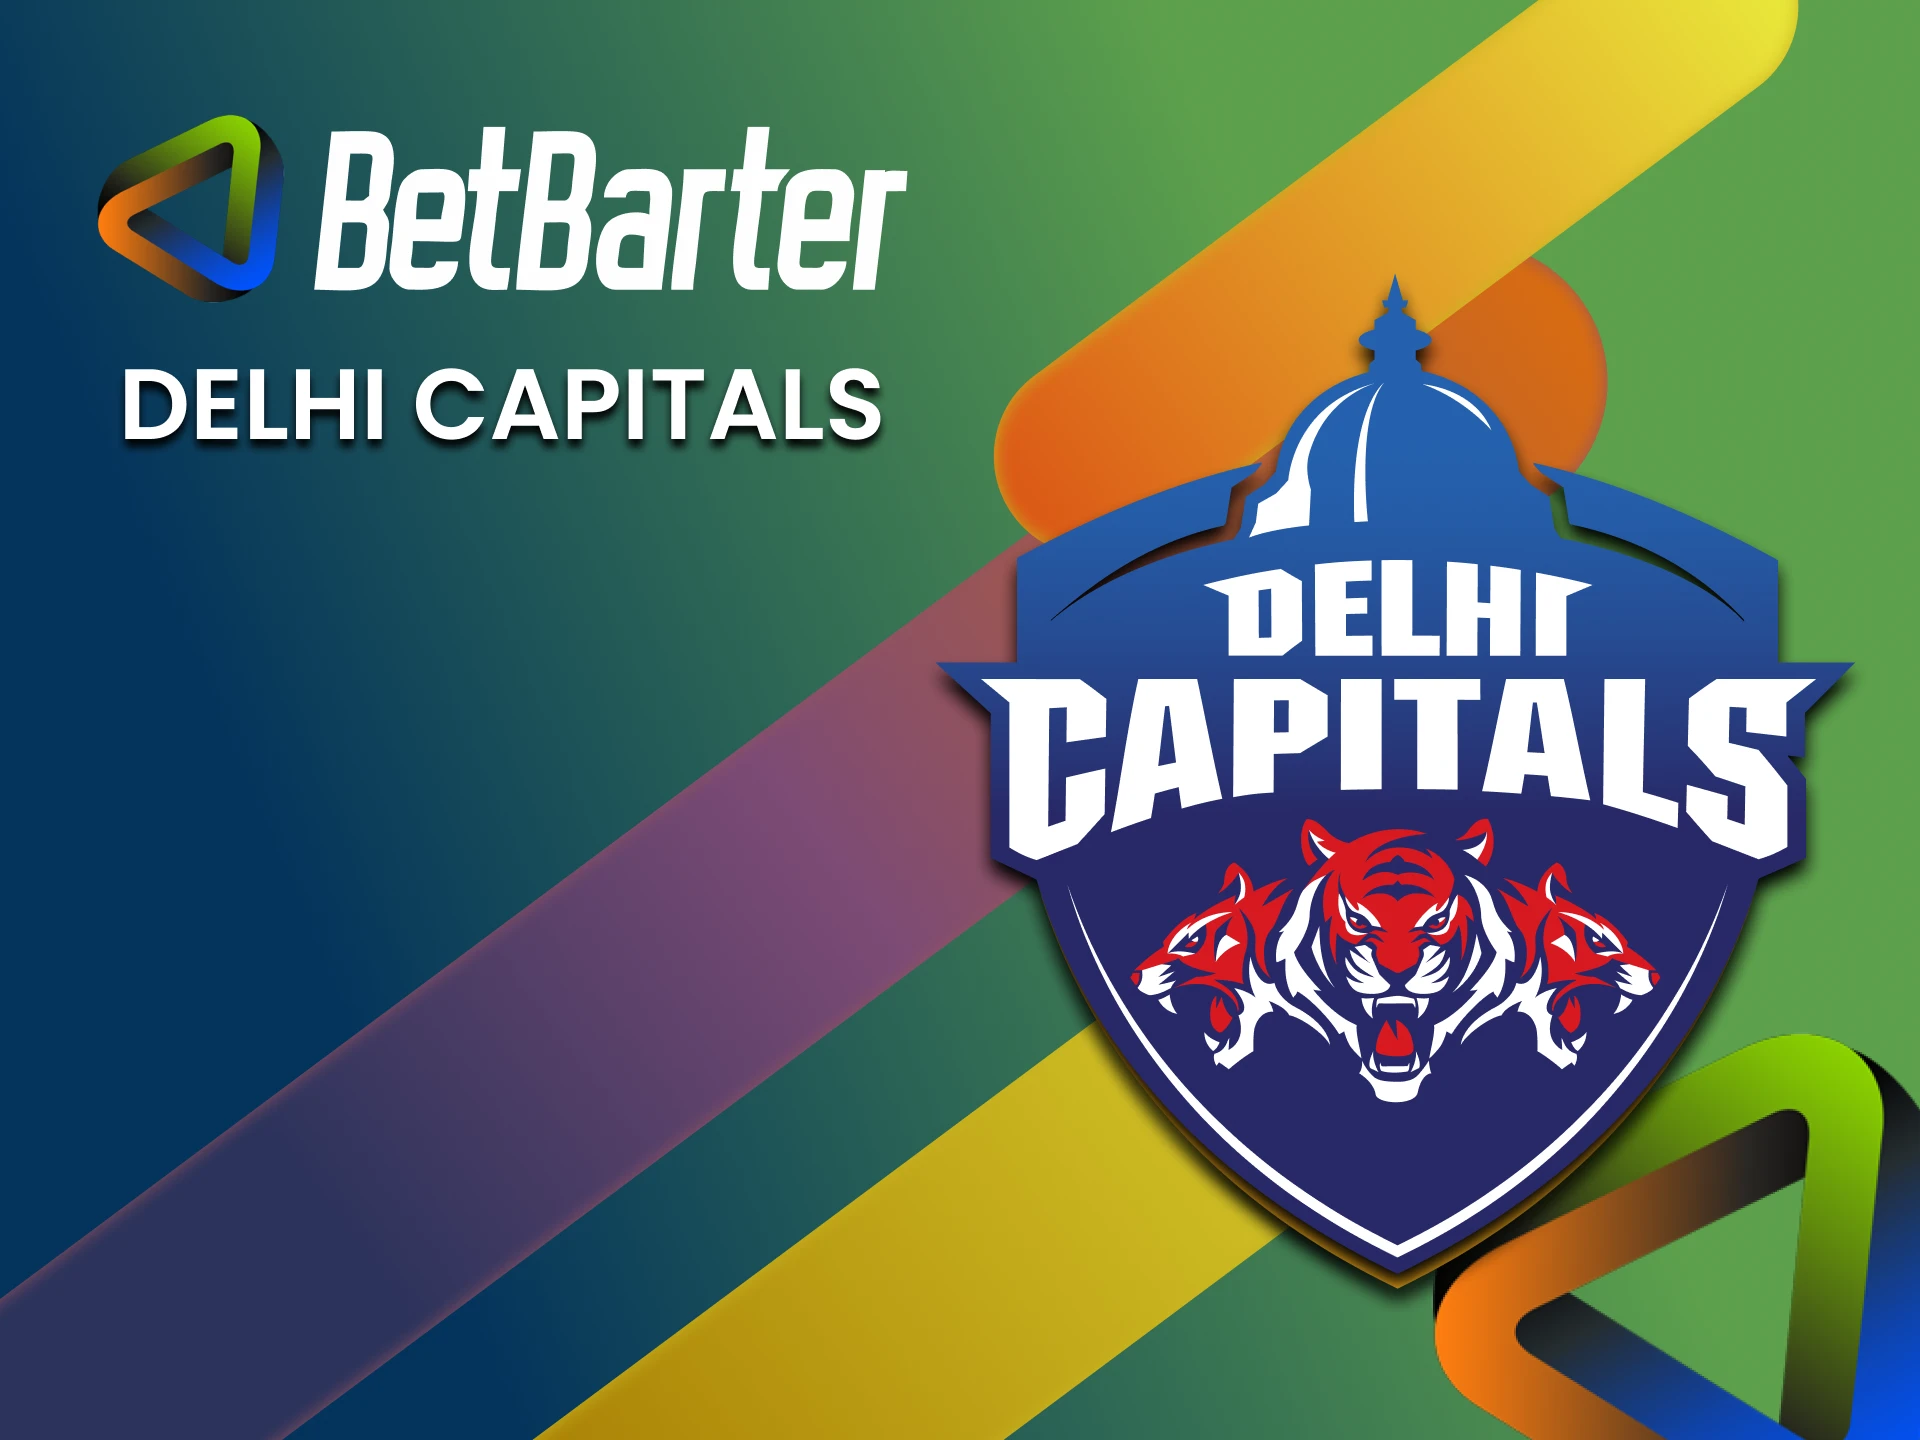 Choose the Delhi Capitals team to bet on BetBarter in the IPL league.